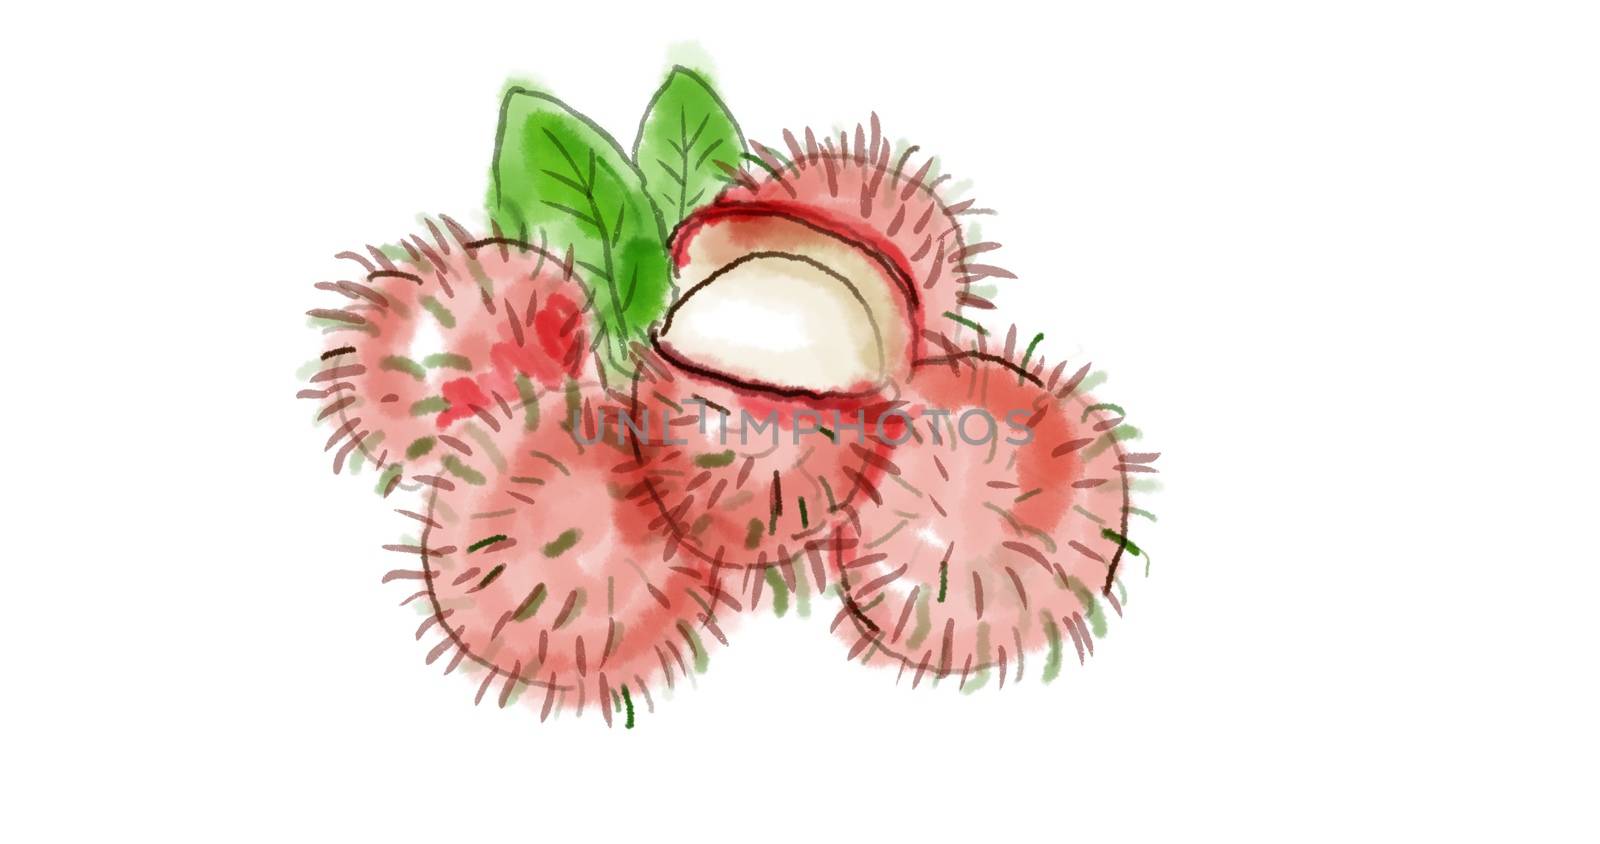 Watercolor drawing of a rambutan fruit, a medium-sized tropical tree in the family Sapindaceae on white.